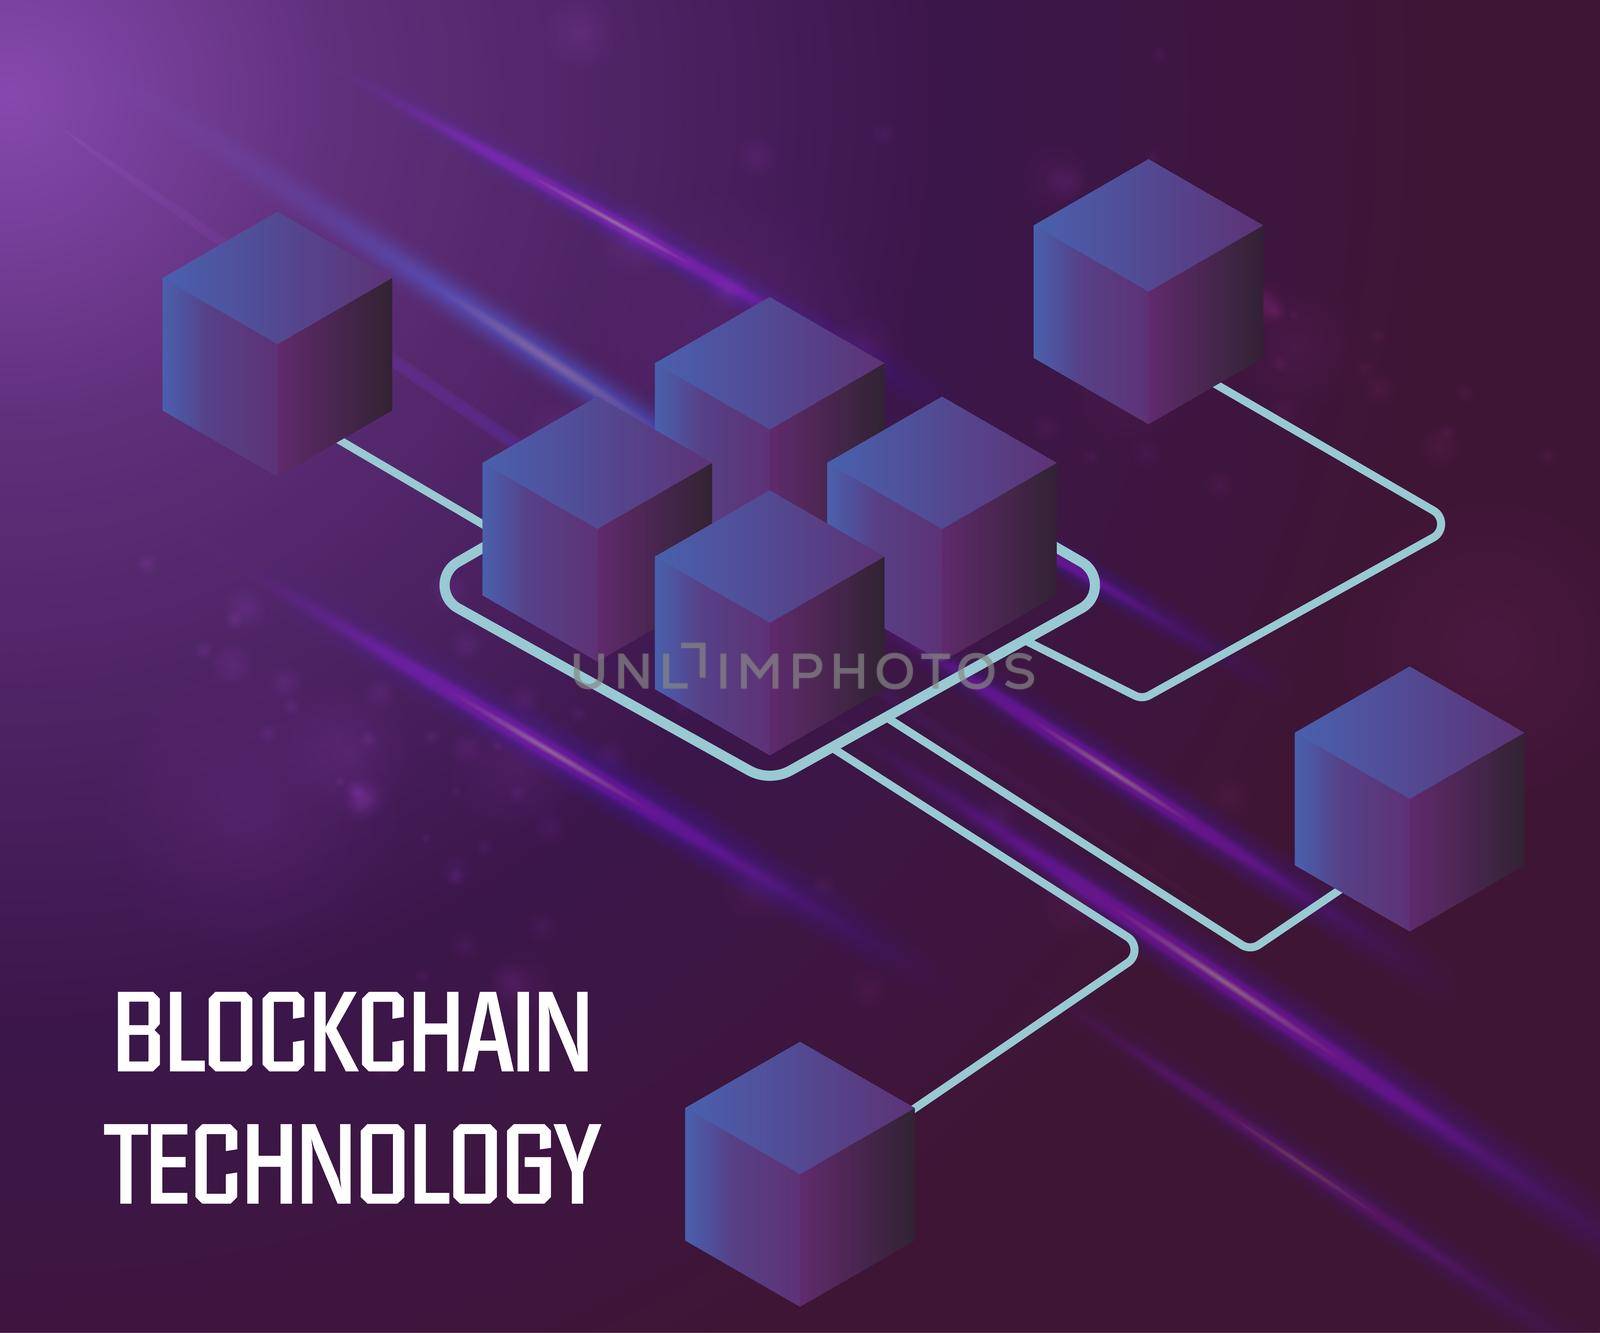 Smart Blockchain Technology background. Connected abstract isometric blocks